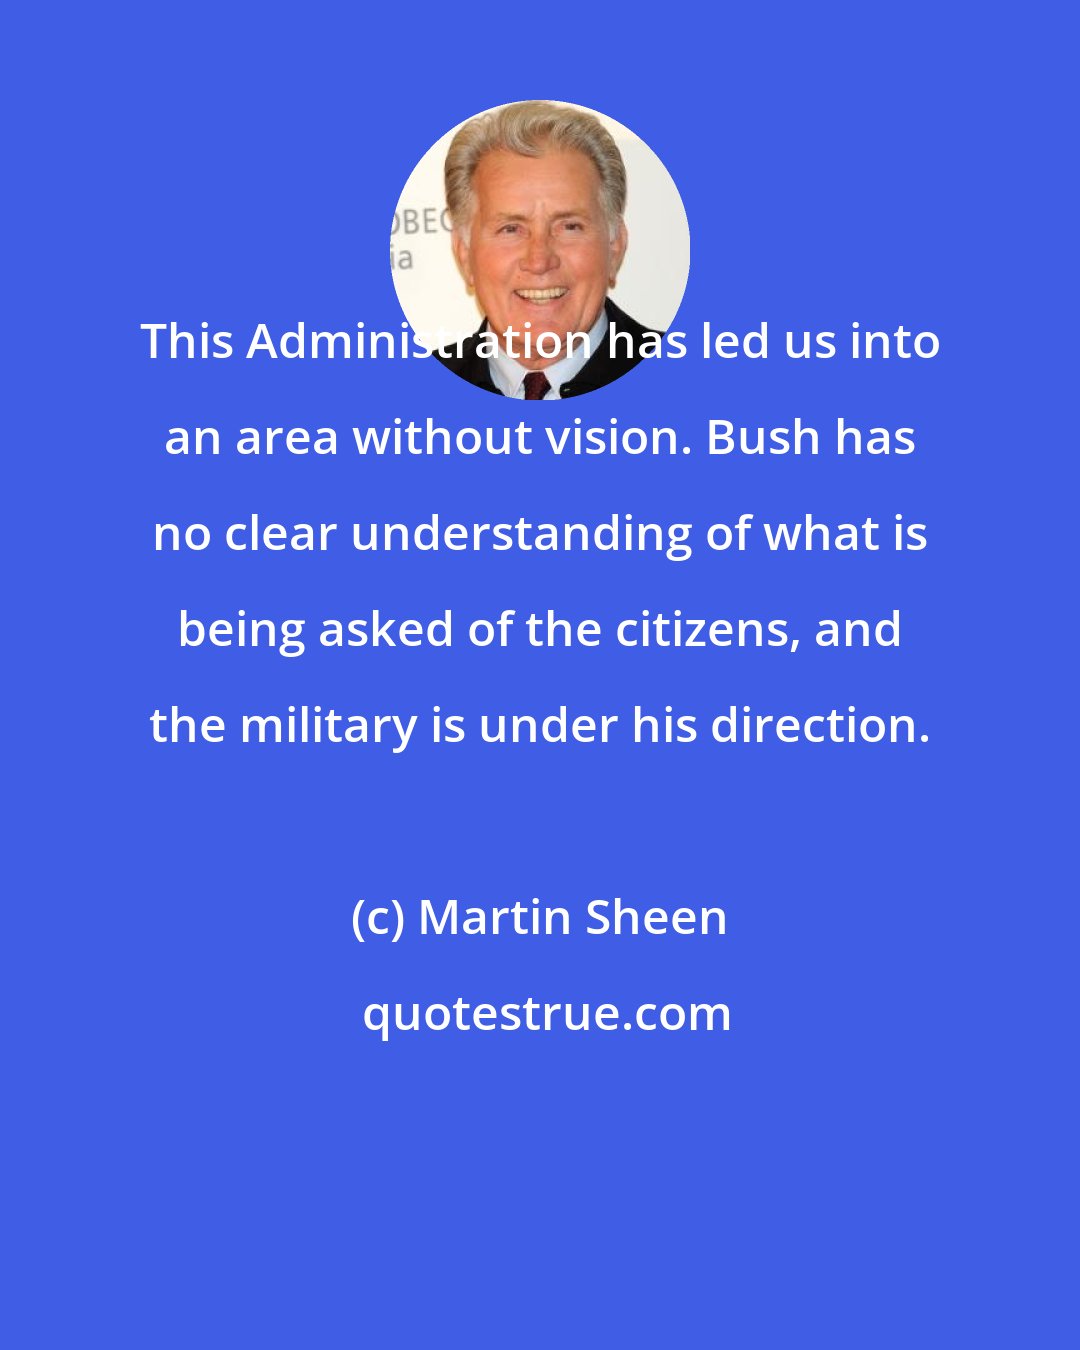 Martin Sheen: This Administration has led us into an area without vision. Bush has no clear understanding of what is being asked of the citizens, and the military is under his direction.